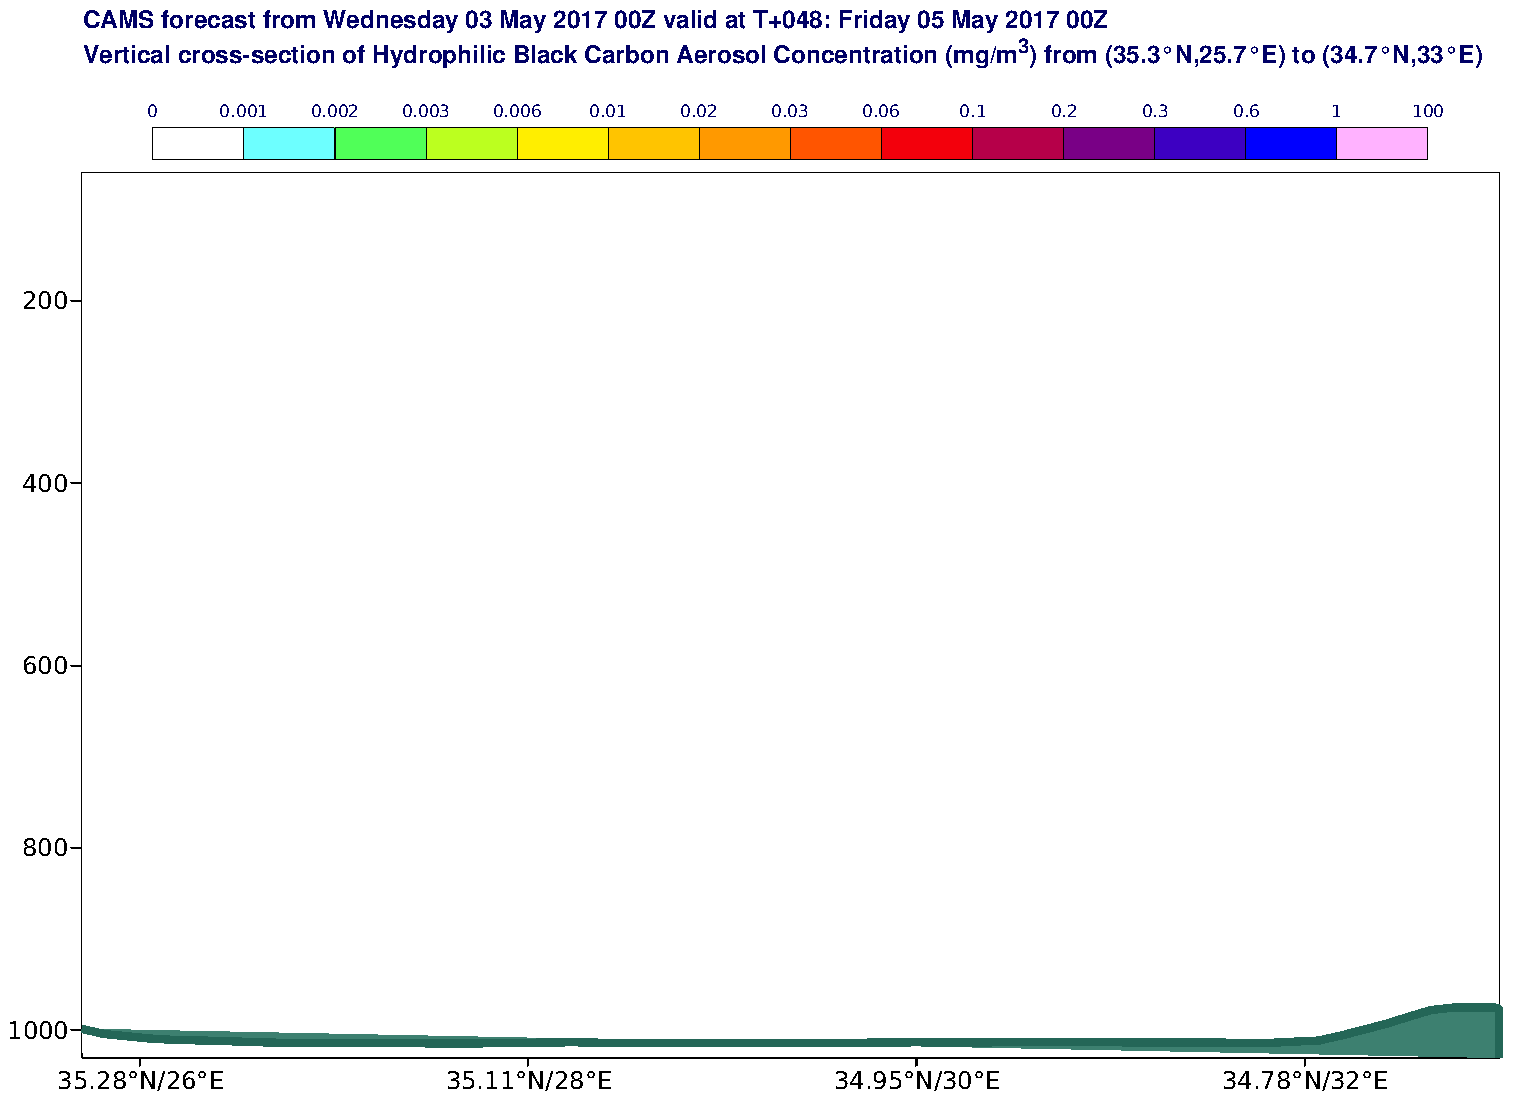 Vertical cross-section of Hydrophilic Black Carbon Aerosol Concentration (mg/m3) valid at T48 - 2017-05-05 00:00